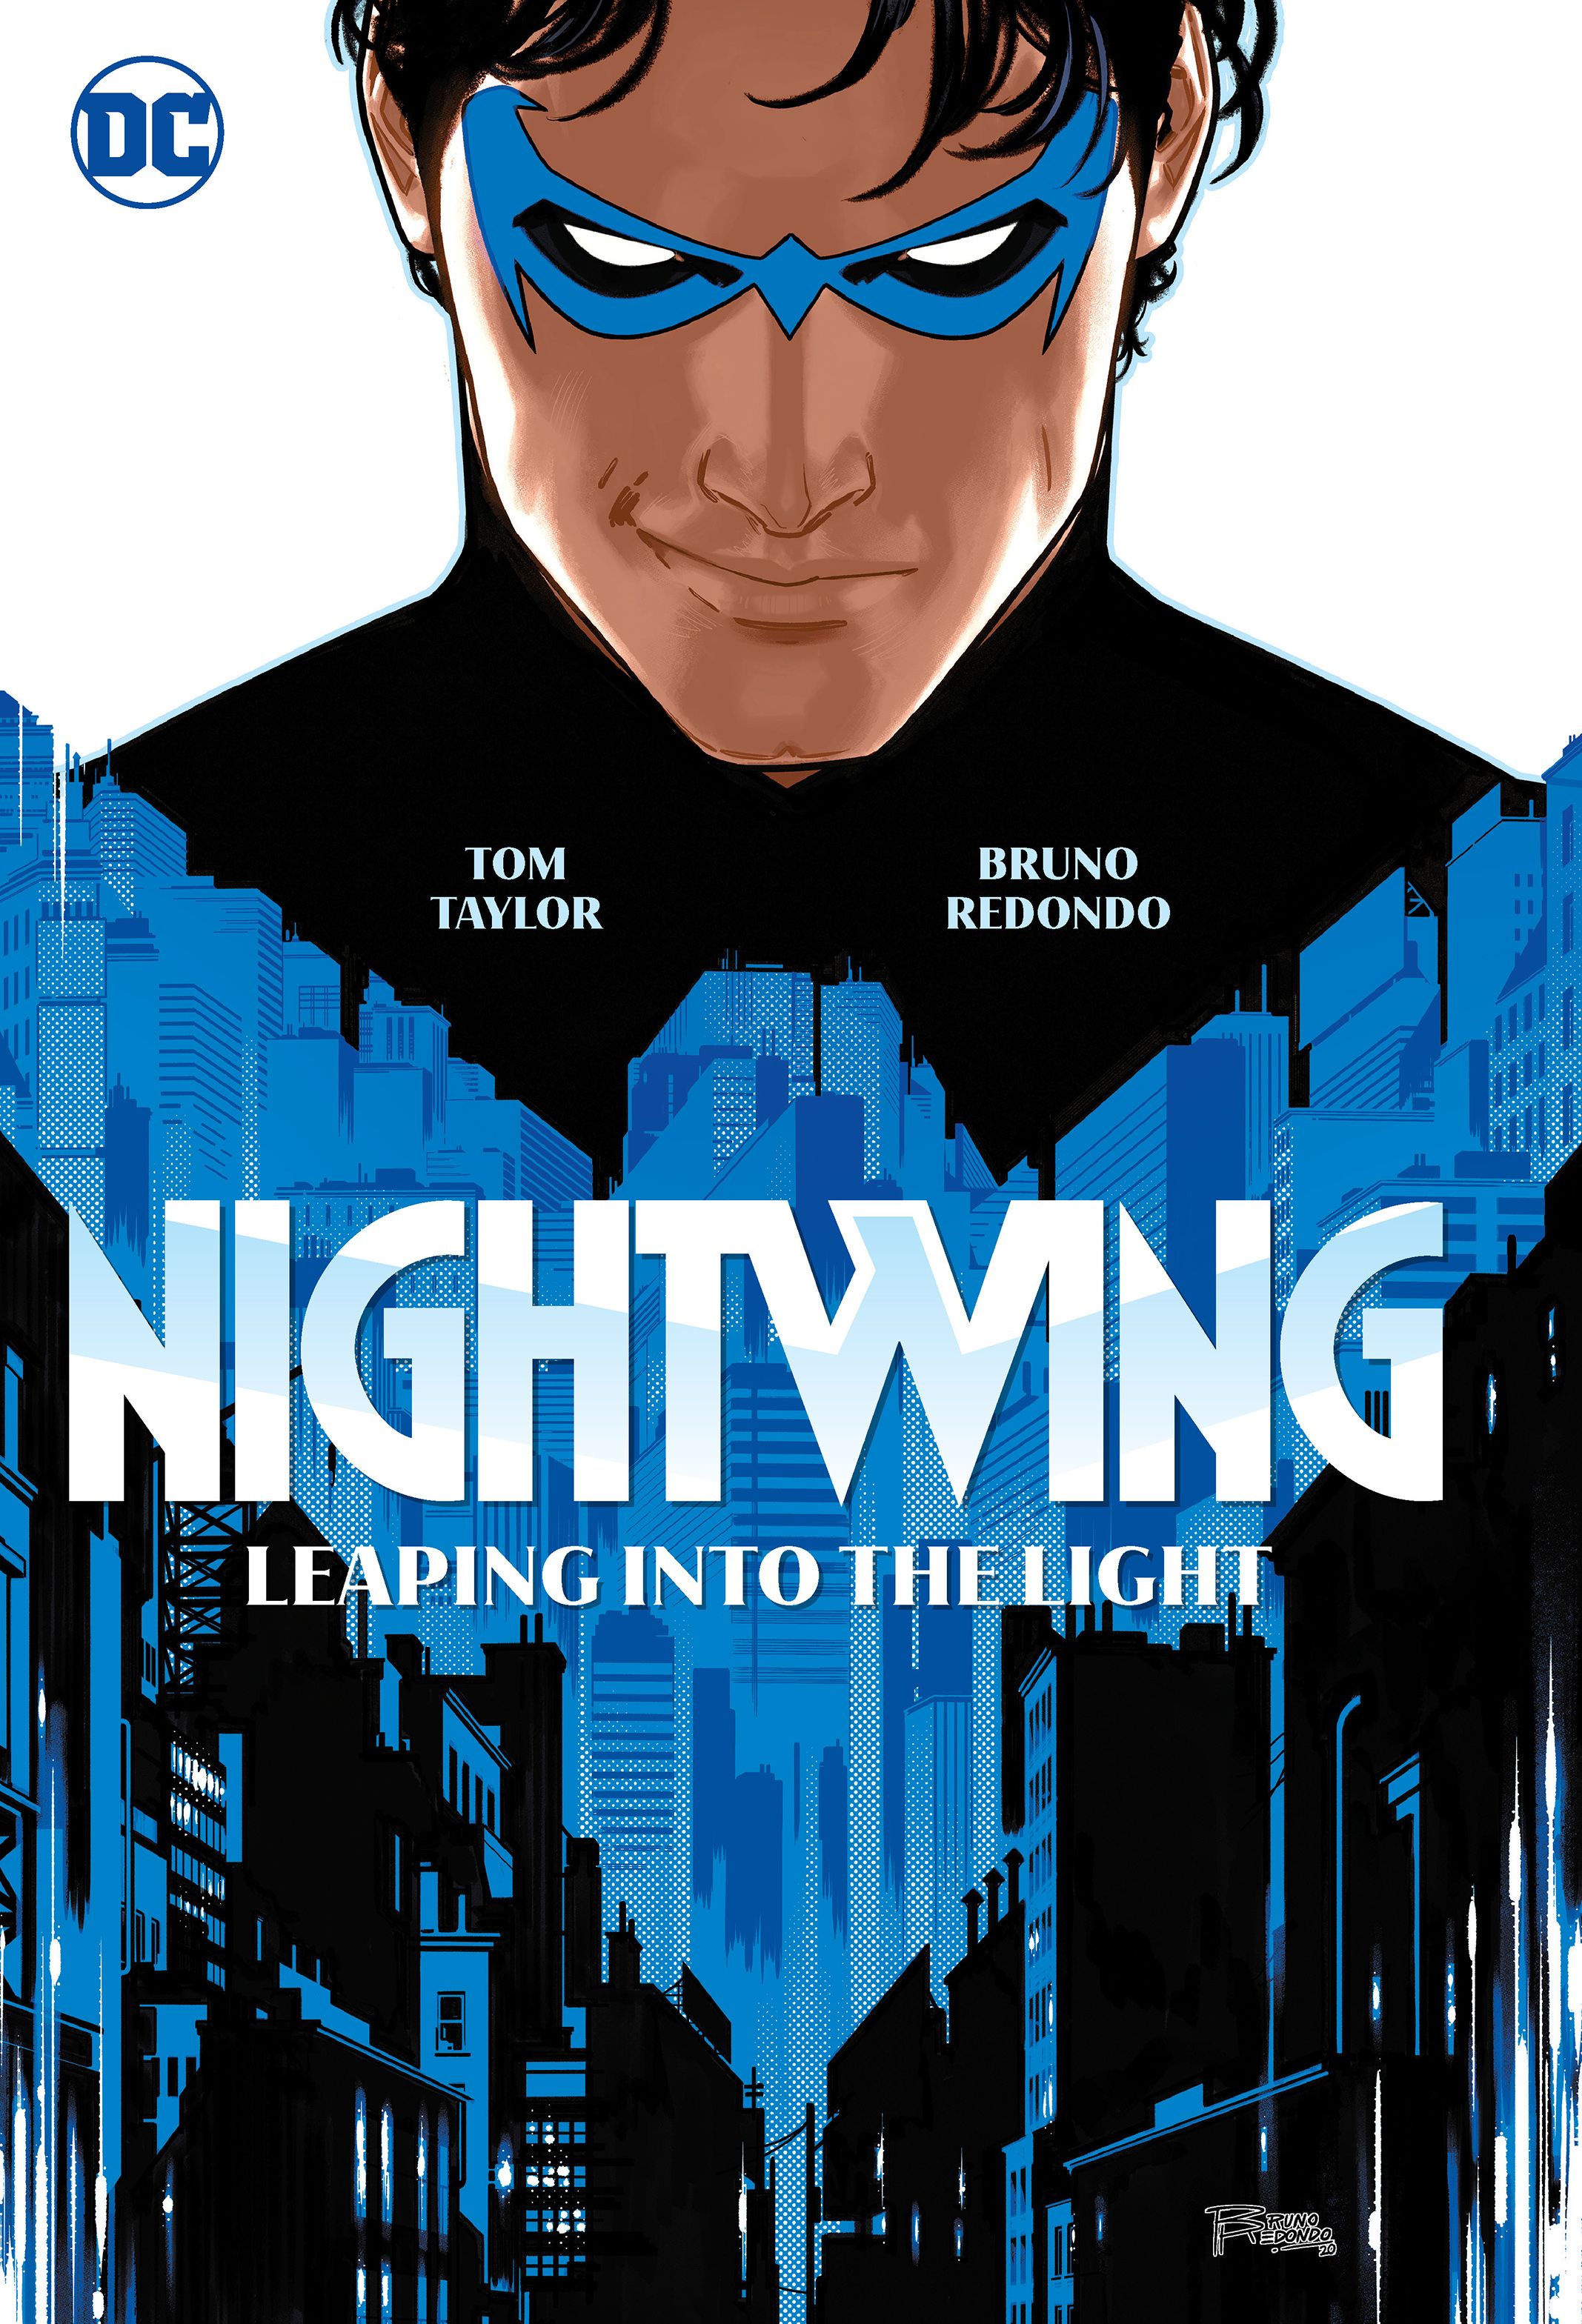 Nightwing Vol 1 Leaping into the Light